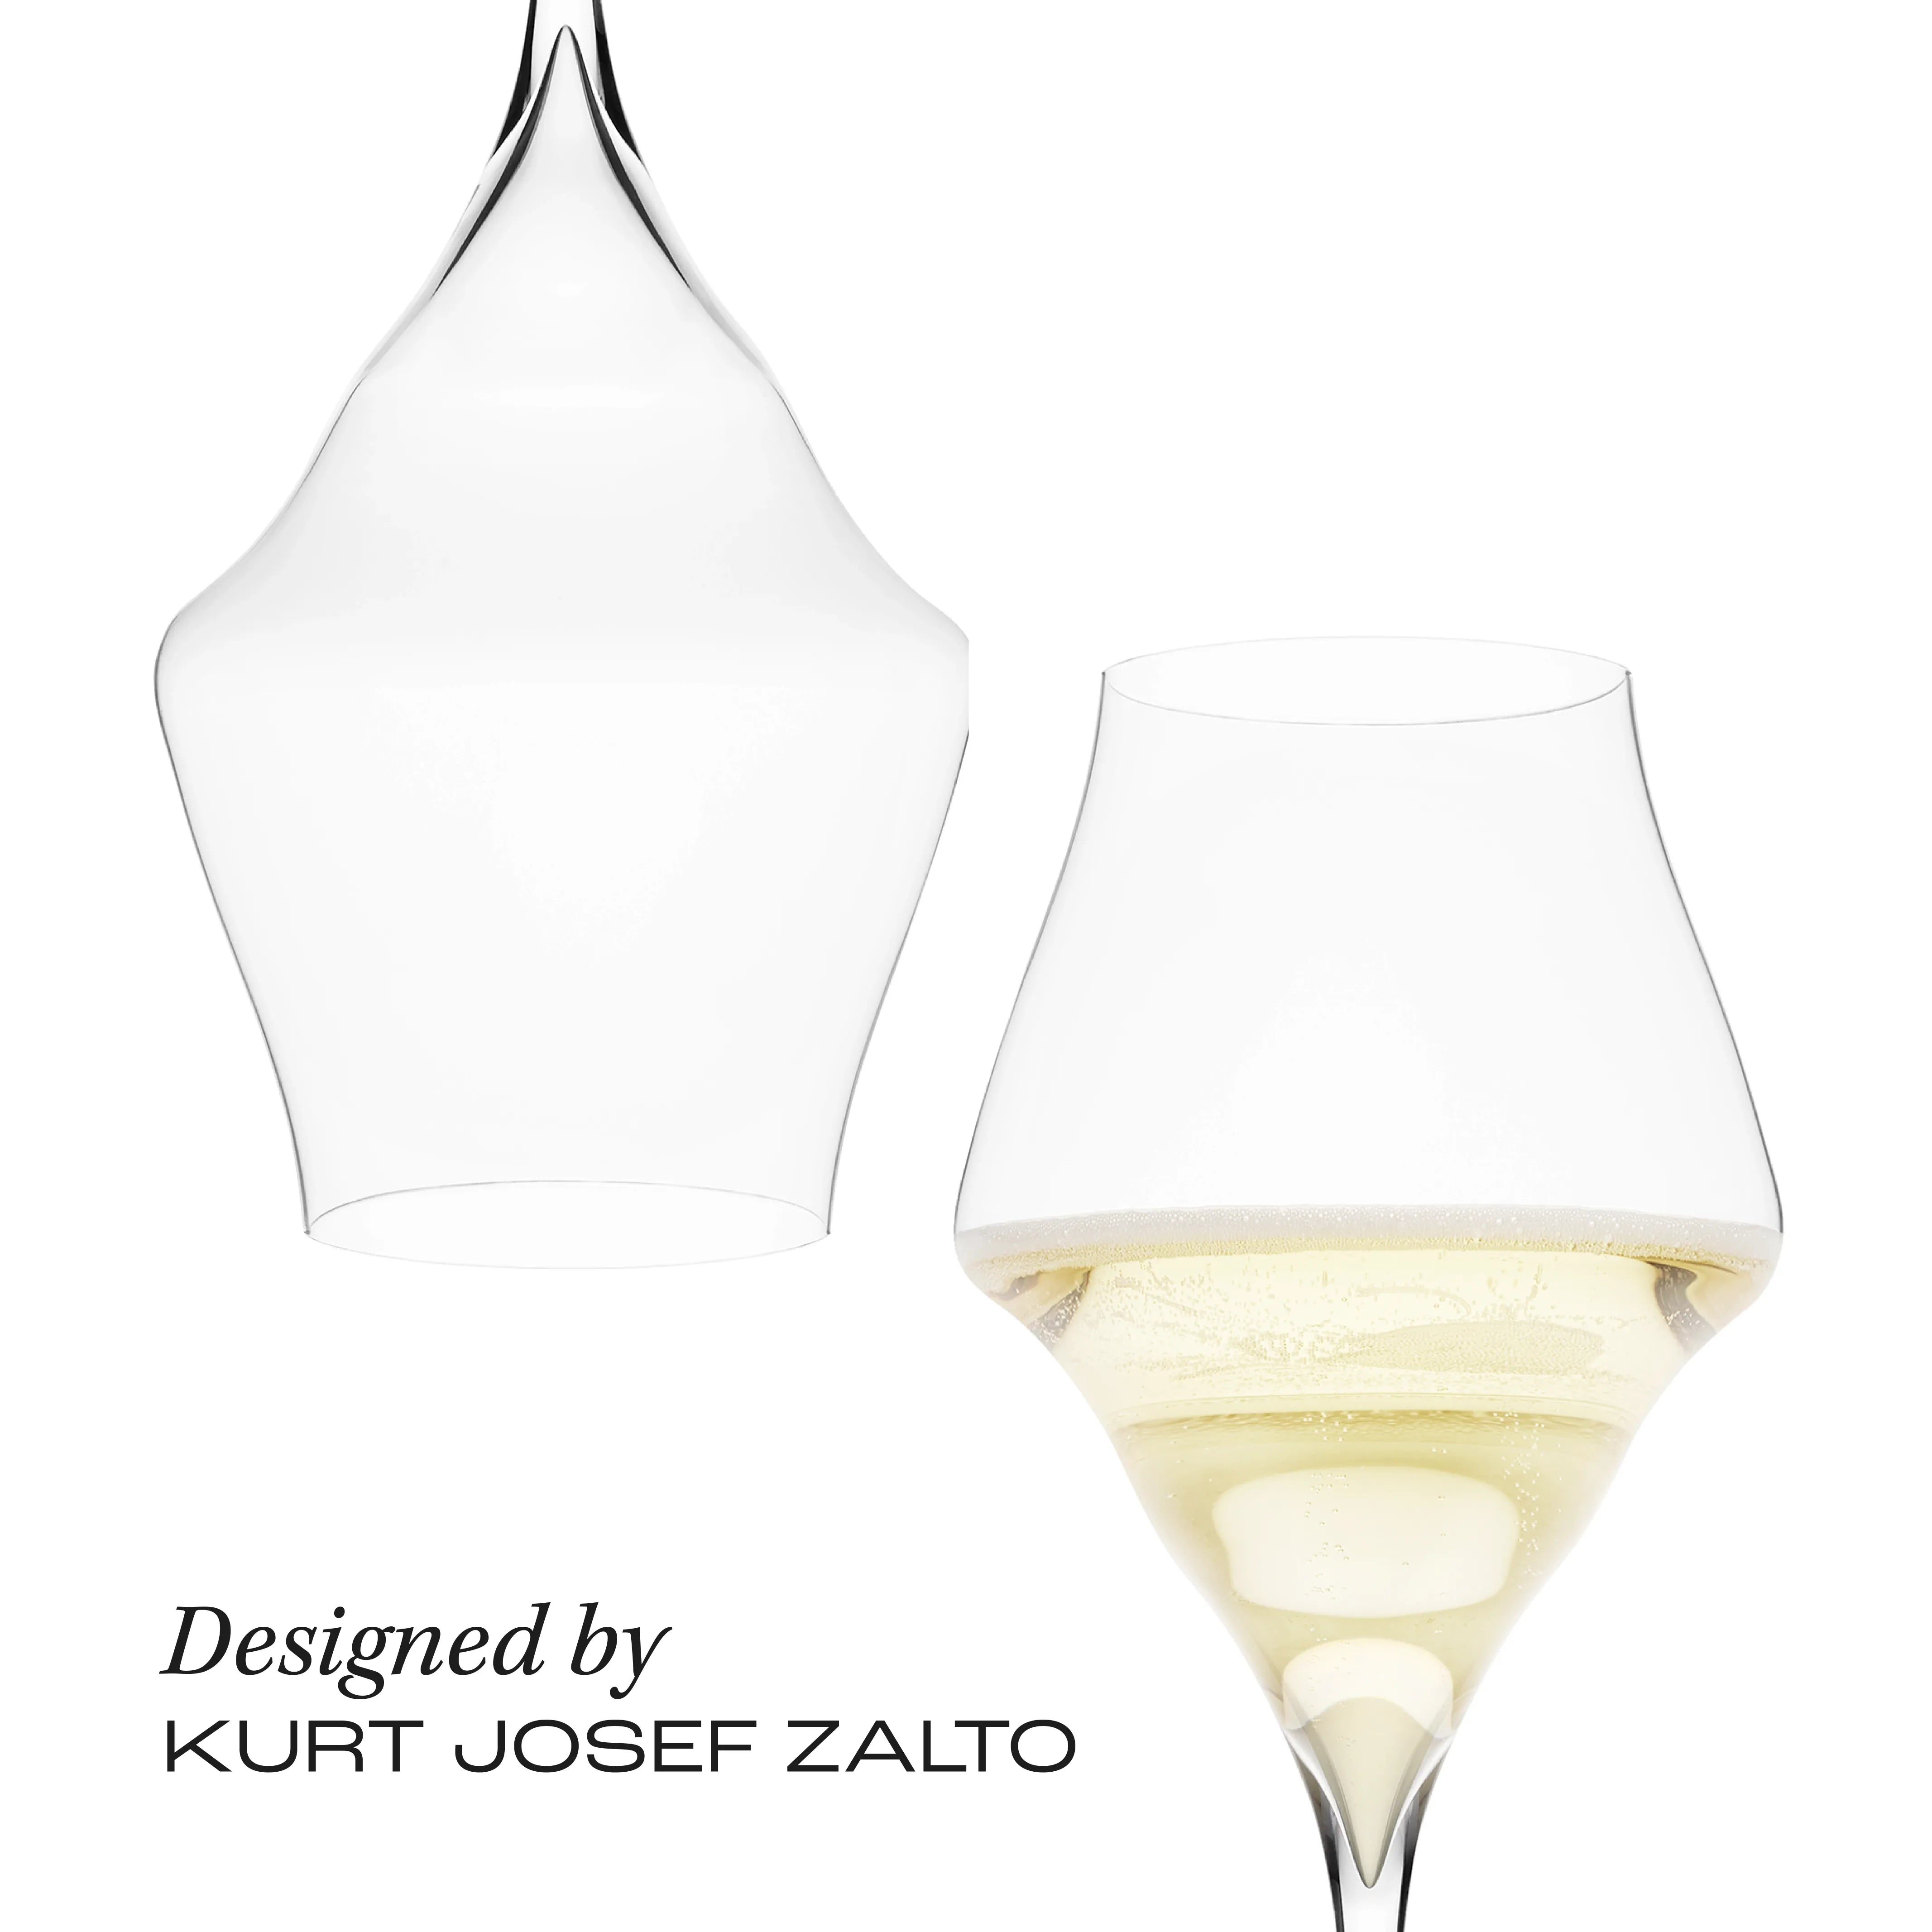 Tulip Champagne Glass Dimensions & Drawings